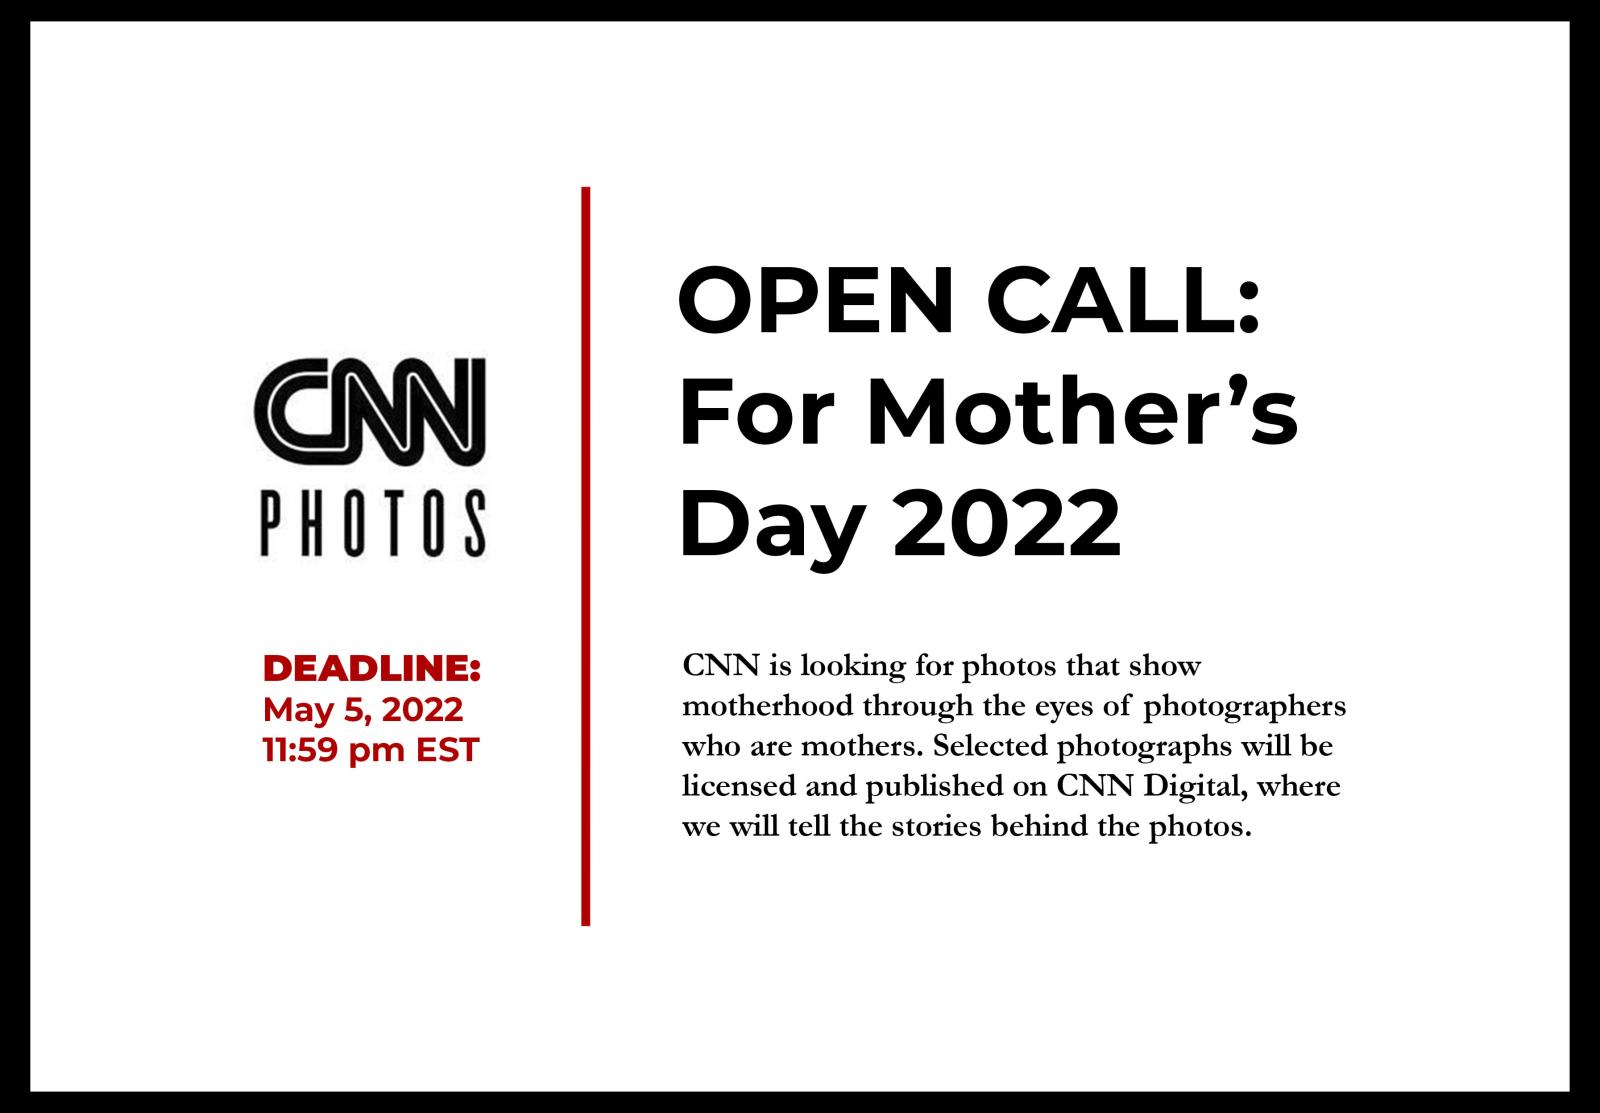 Thumbnail of CNN Photos Open Call for Mother’s Day 2022